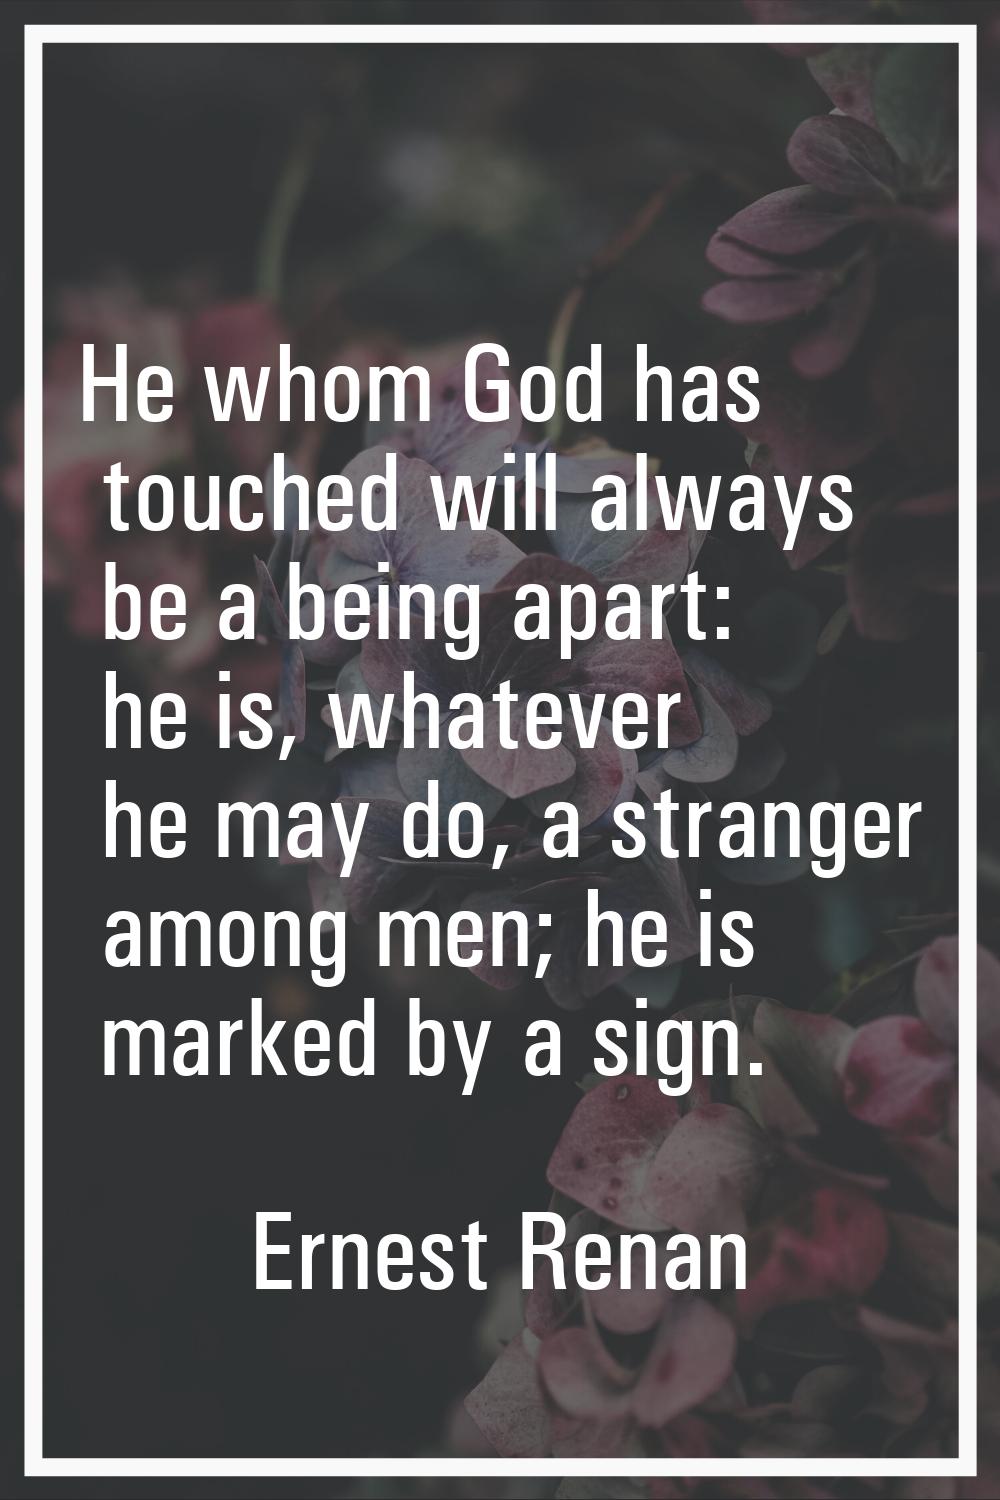 He whom God has touched will always be a being apart: he is, whatever he may do, a stranger among m